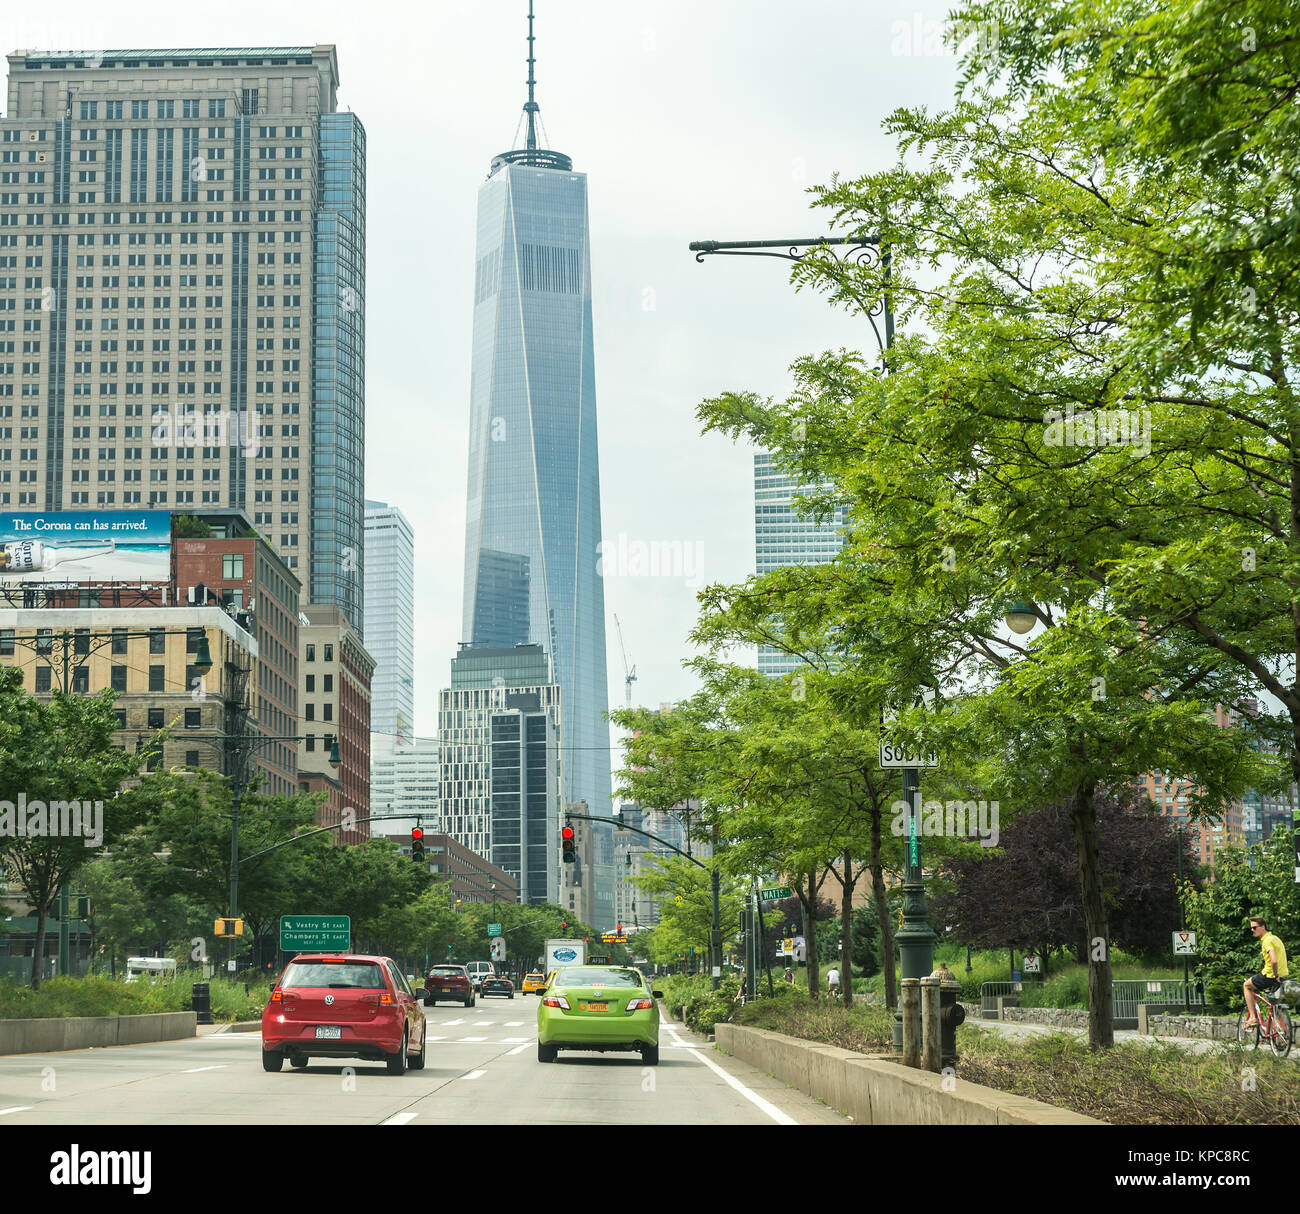 NEW YORK - JULY 13: Freedom Tower (1 WTC) in Manhattan on July 13, 2015. One World Trade Center is the tallest building in the Western Hemisphere and  Stock Photo